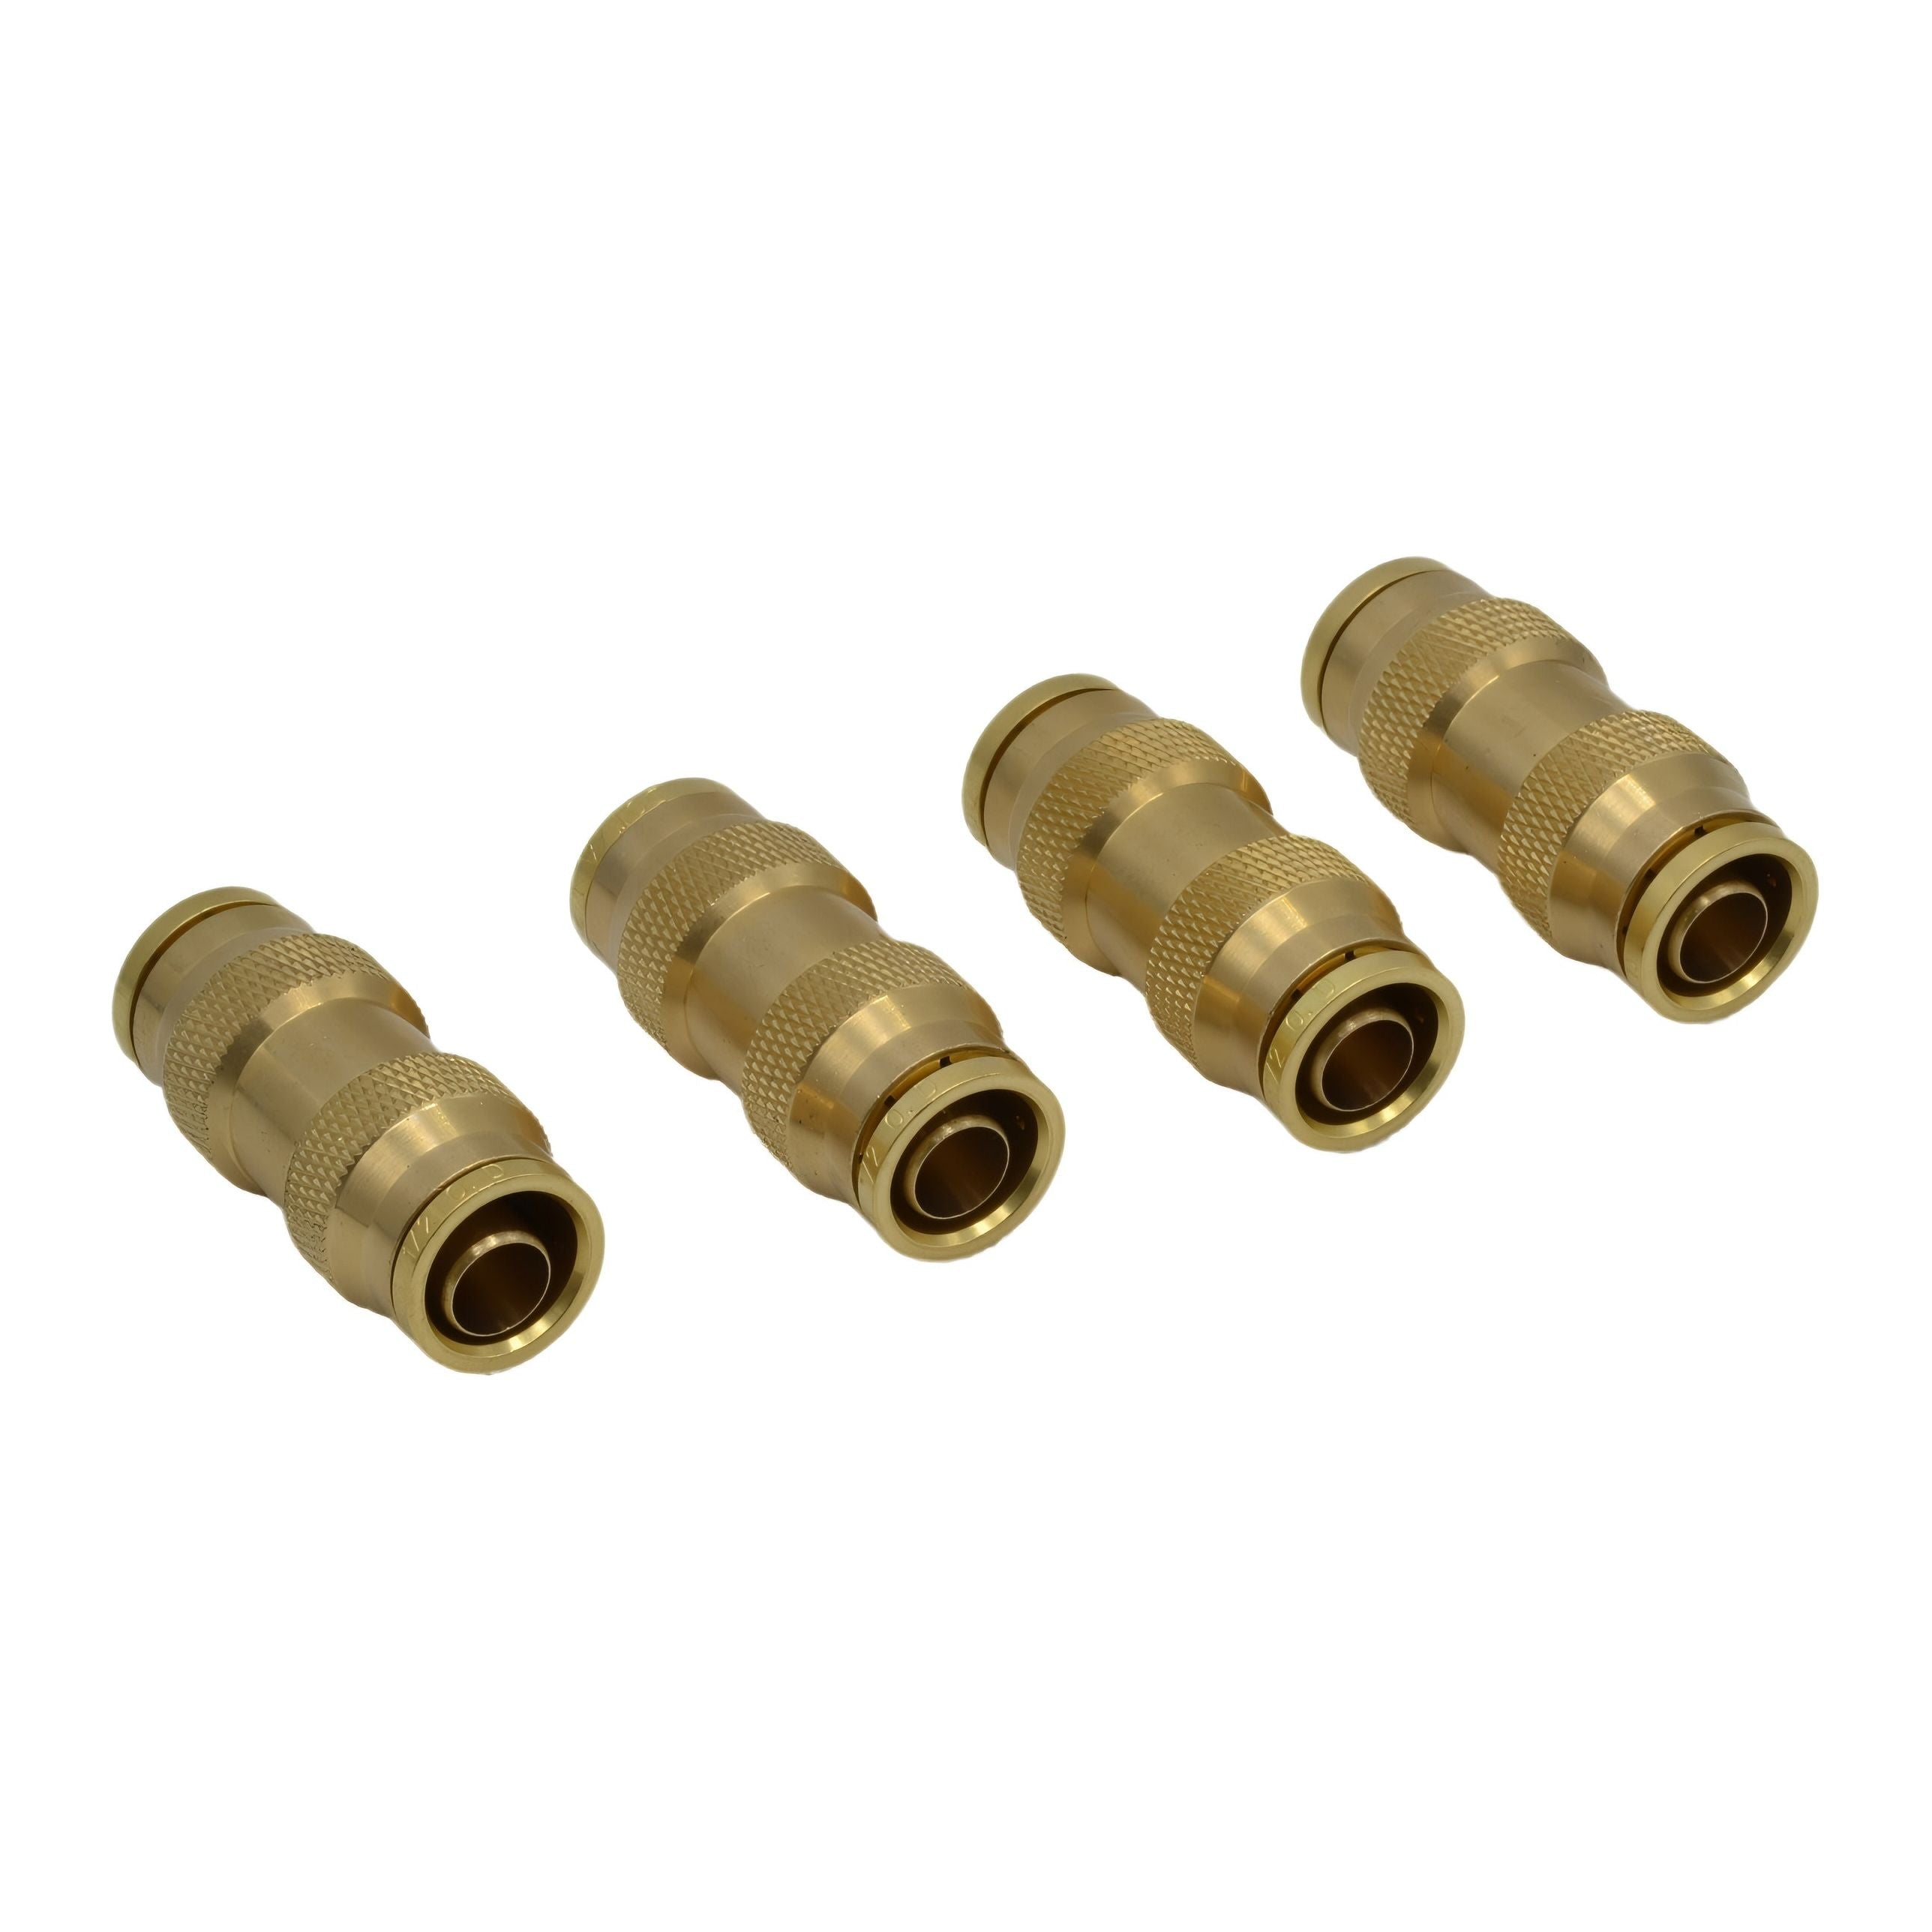 4 Piece 1/2 DOT Straight Brass Push in Hose Connect Grab Kit Assortment